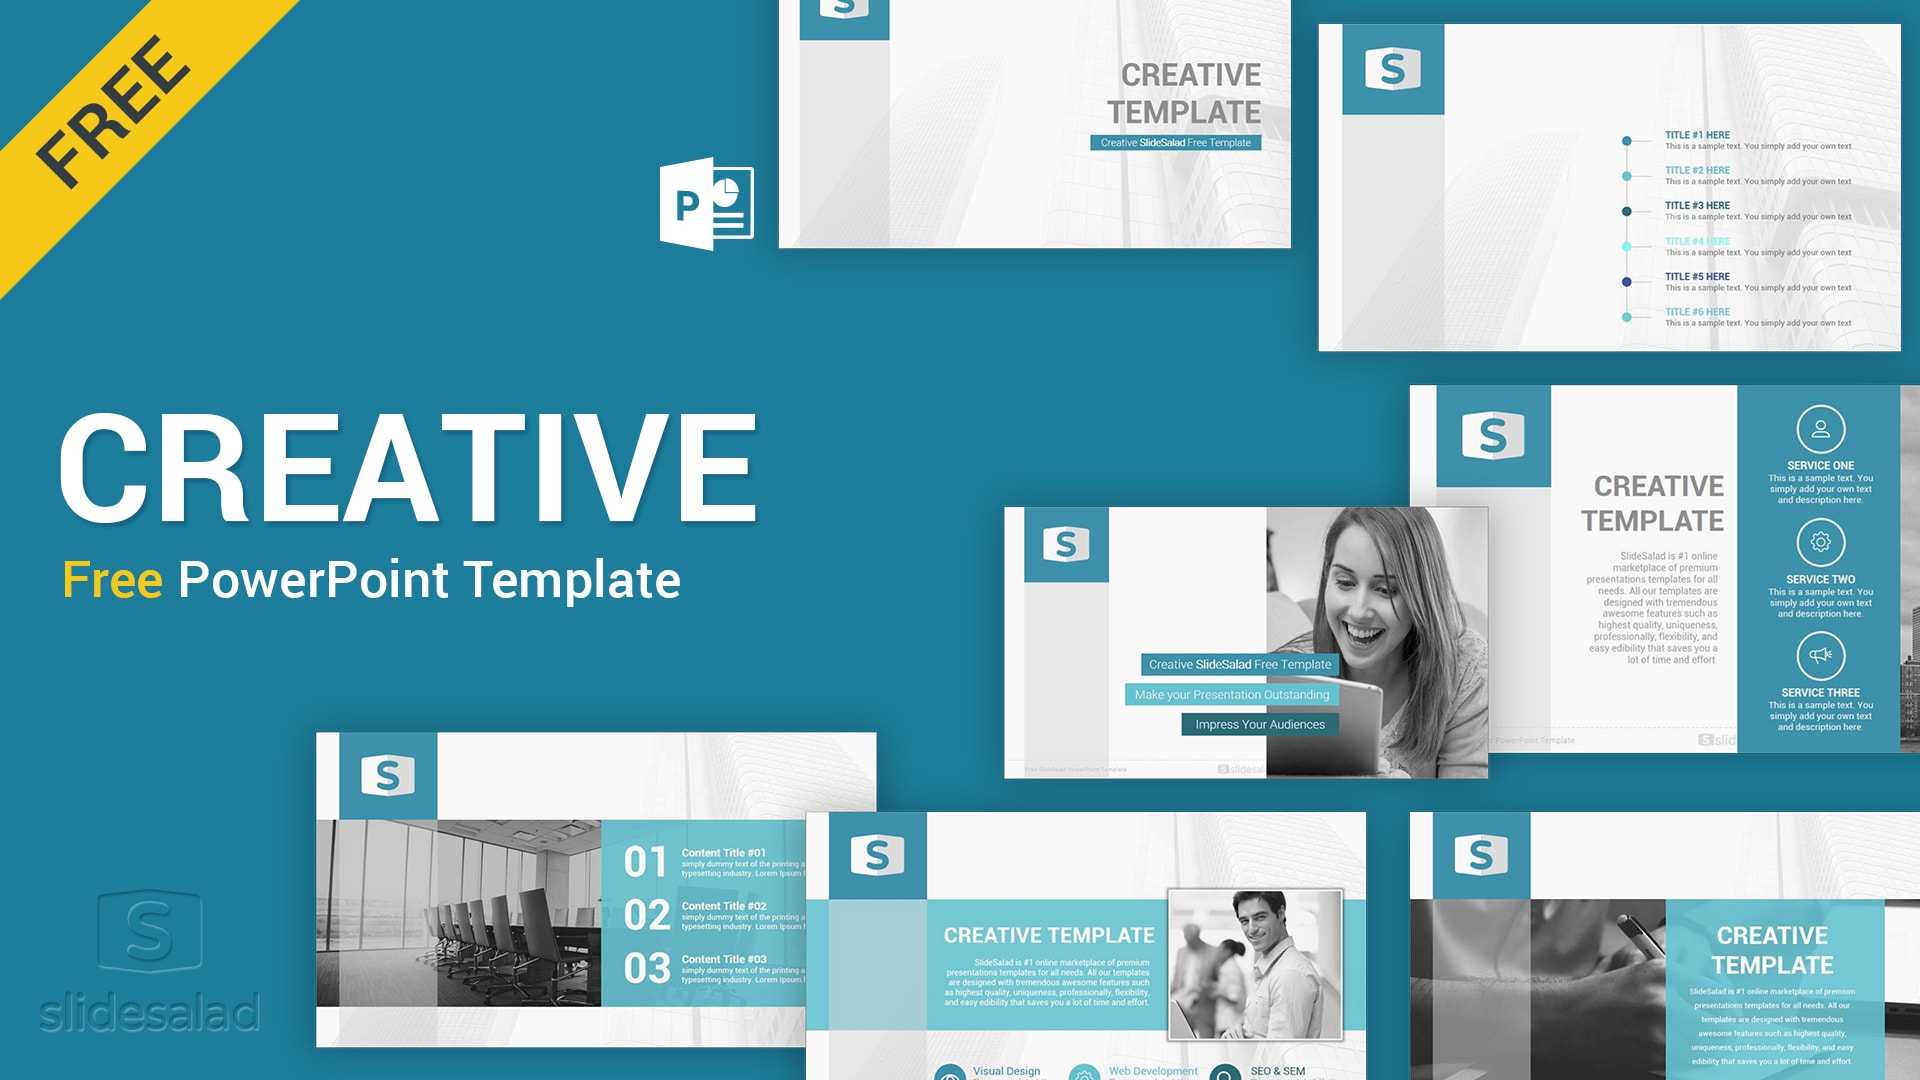 Creative Free Download Powerpoint Template – Slidesalad Within Free Powerpoint Presentation Templates Downloads